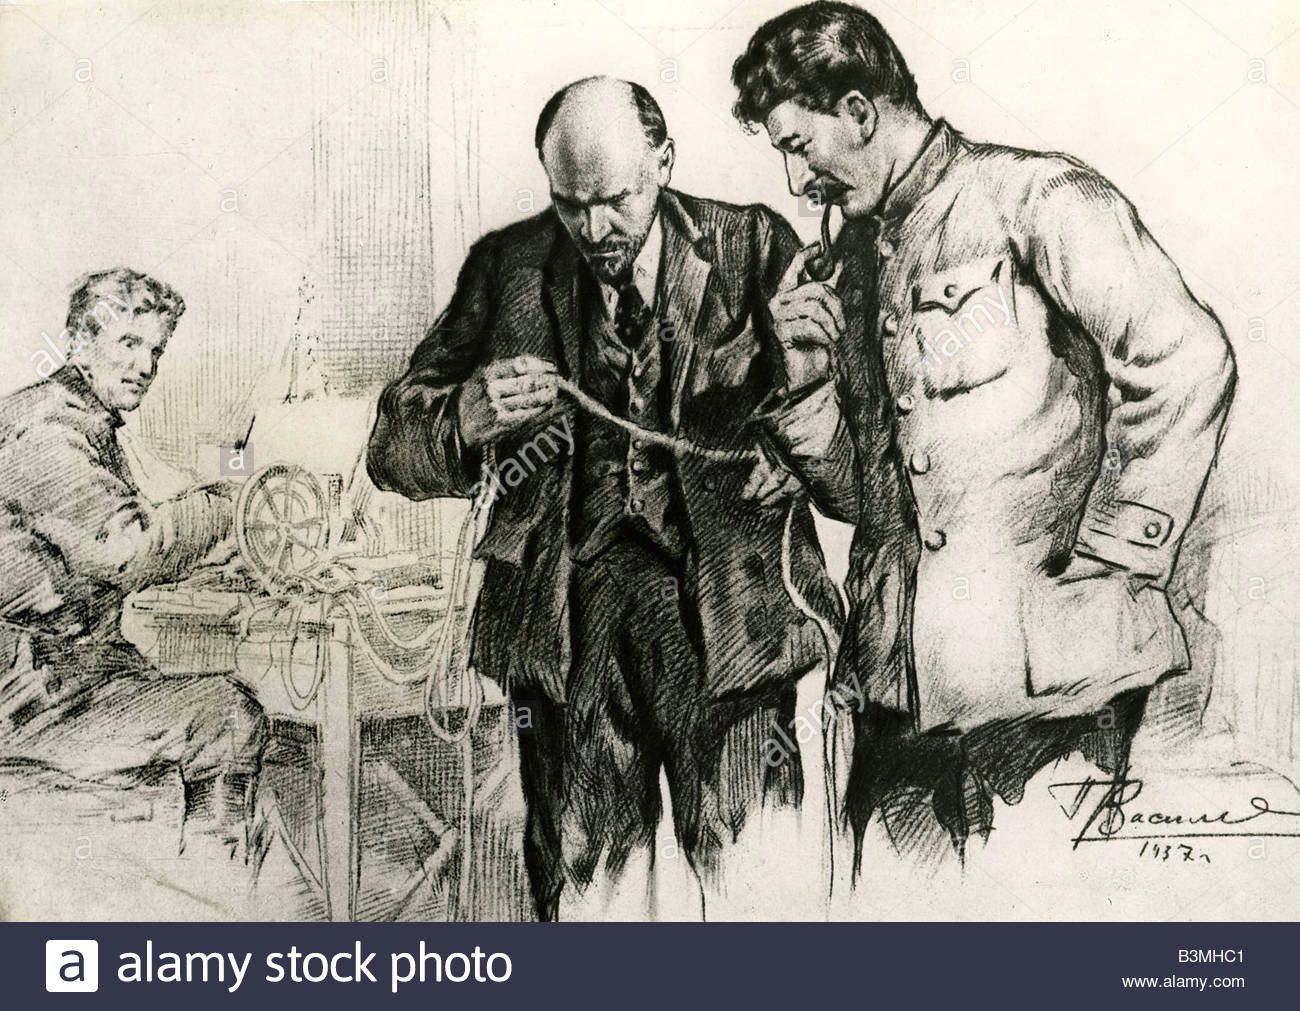 lenin and stalin in the pravda offices shown in a 1940s drawing designed to emphasise their